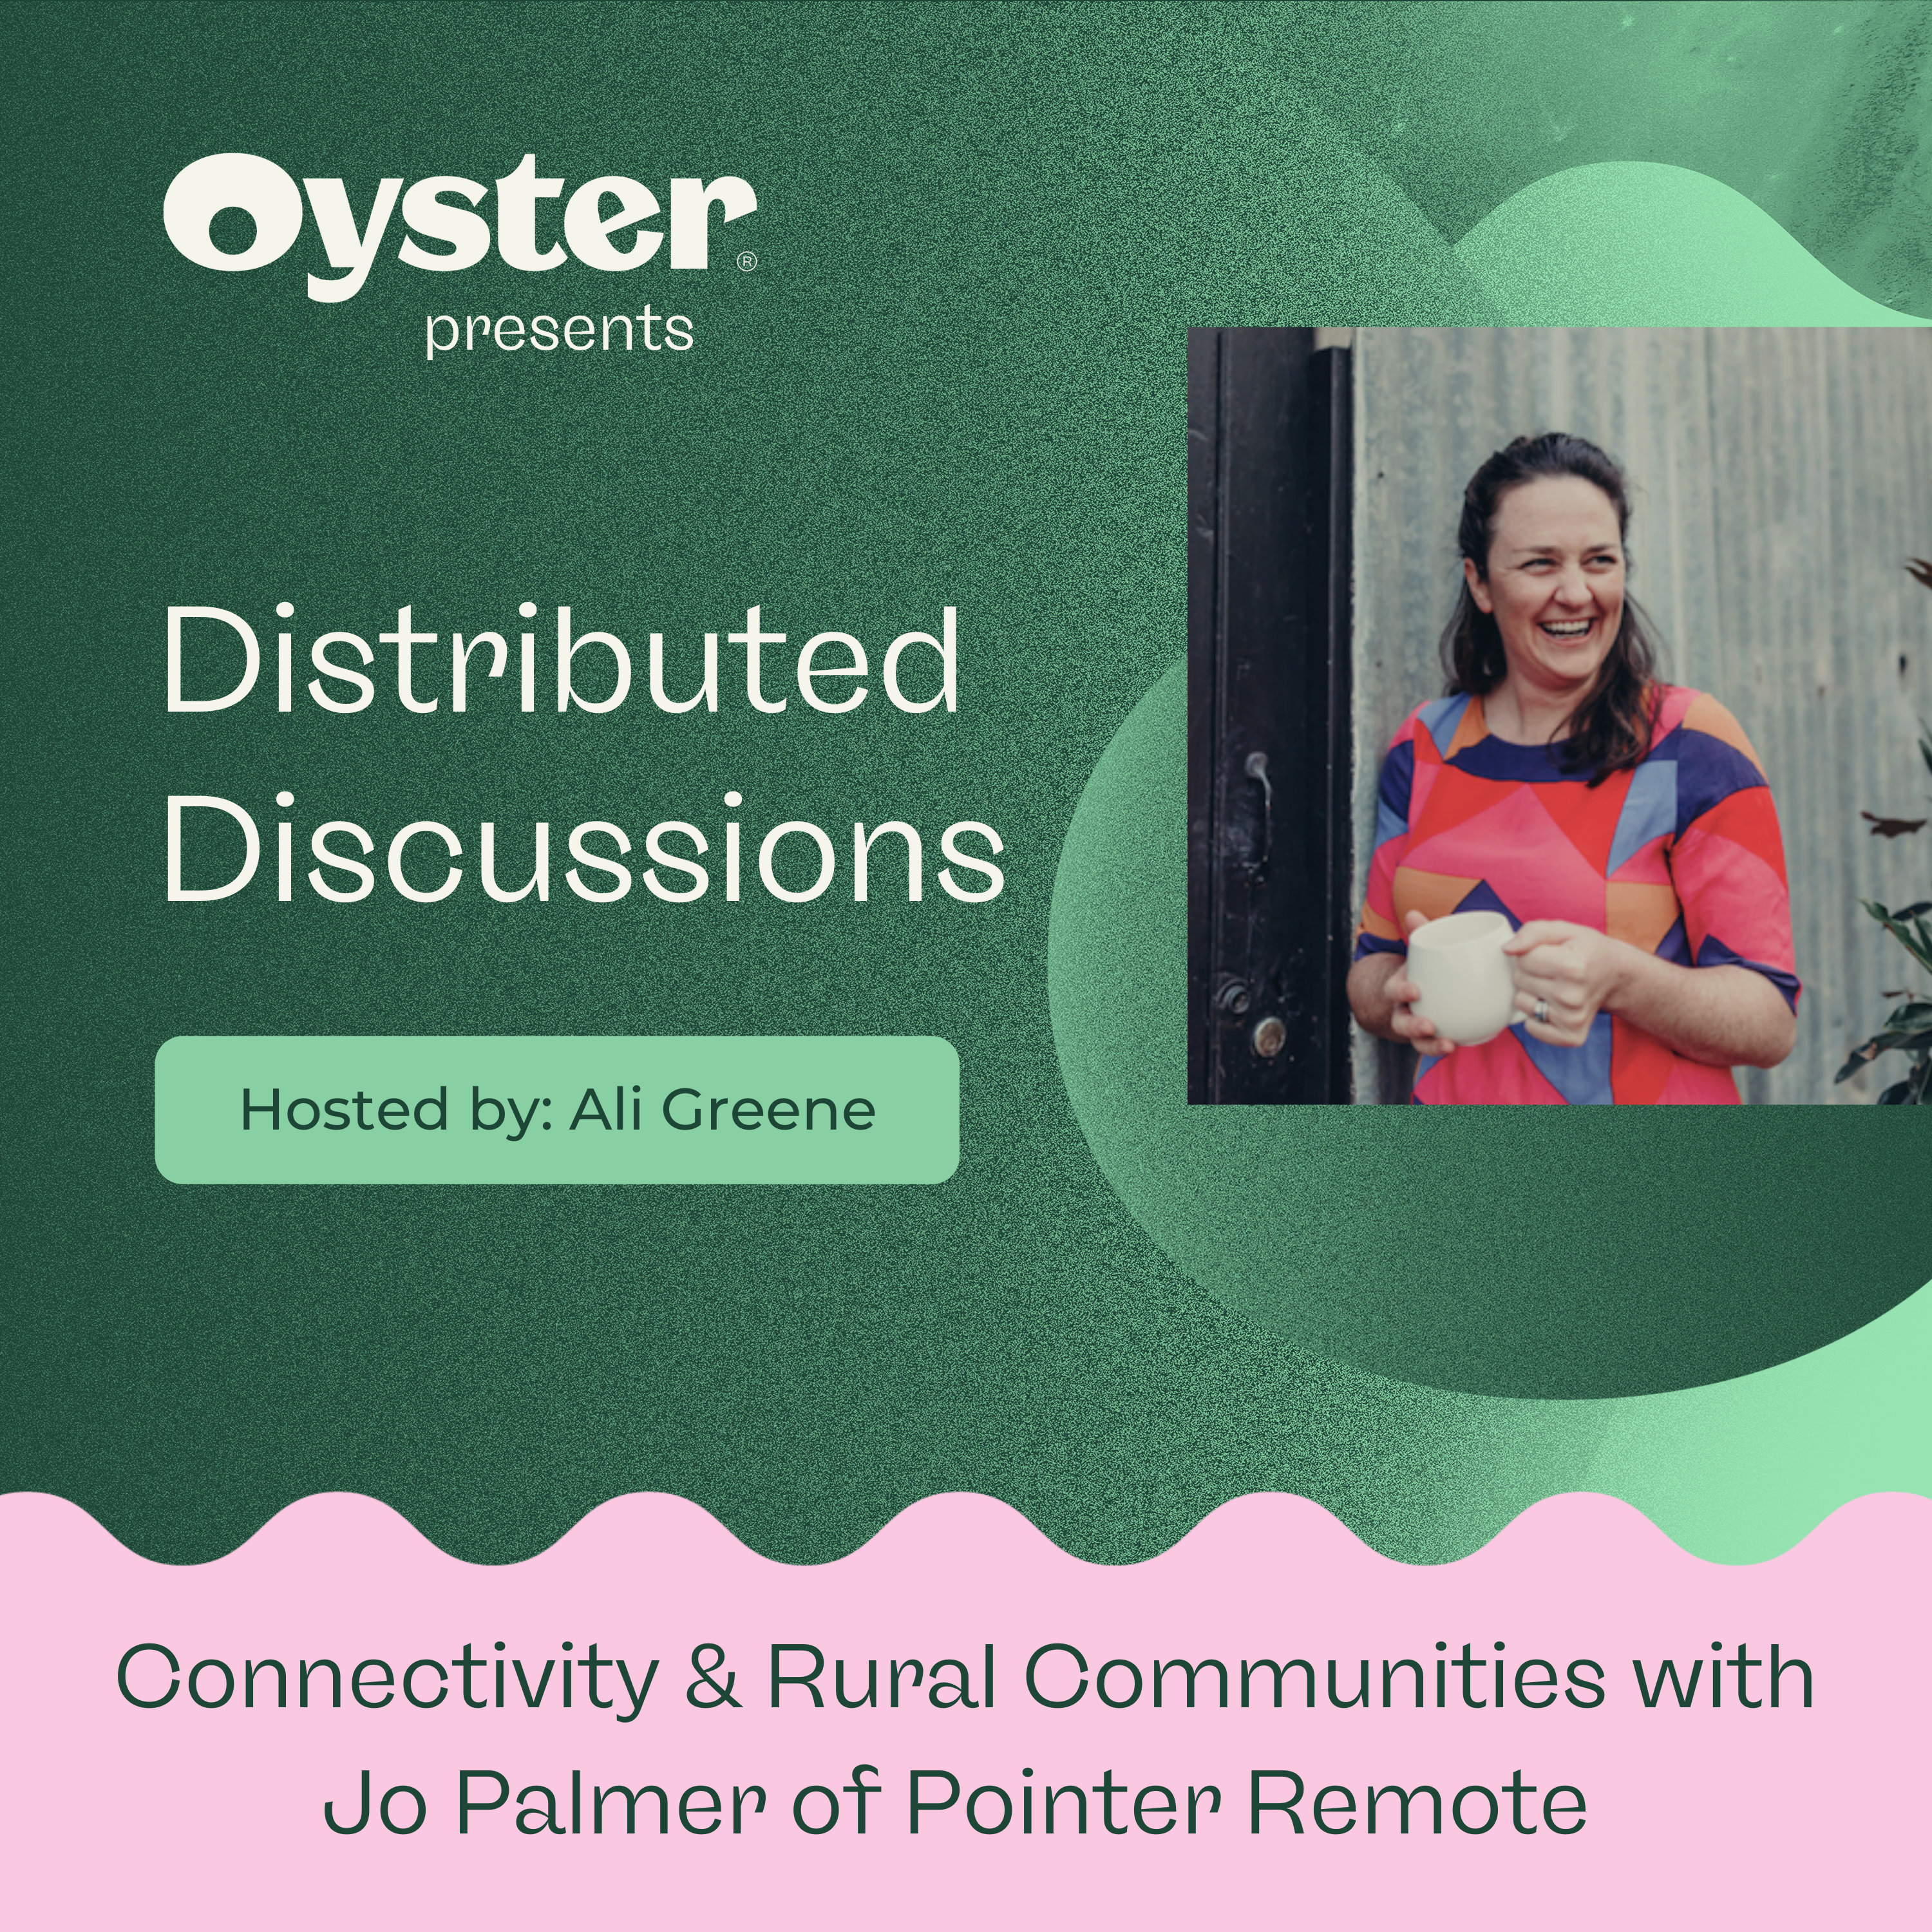 S1E3 - Connectivity & Rural Communities with Jo Palmer